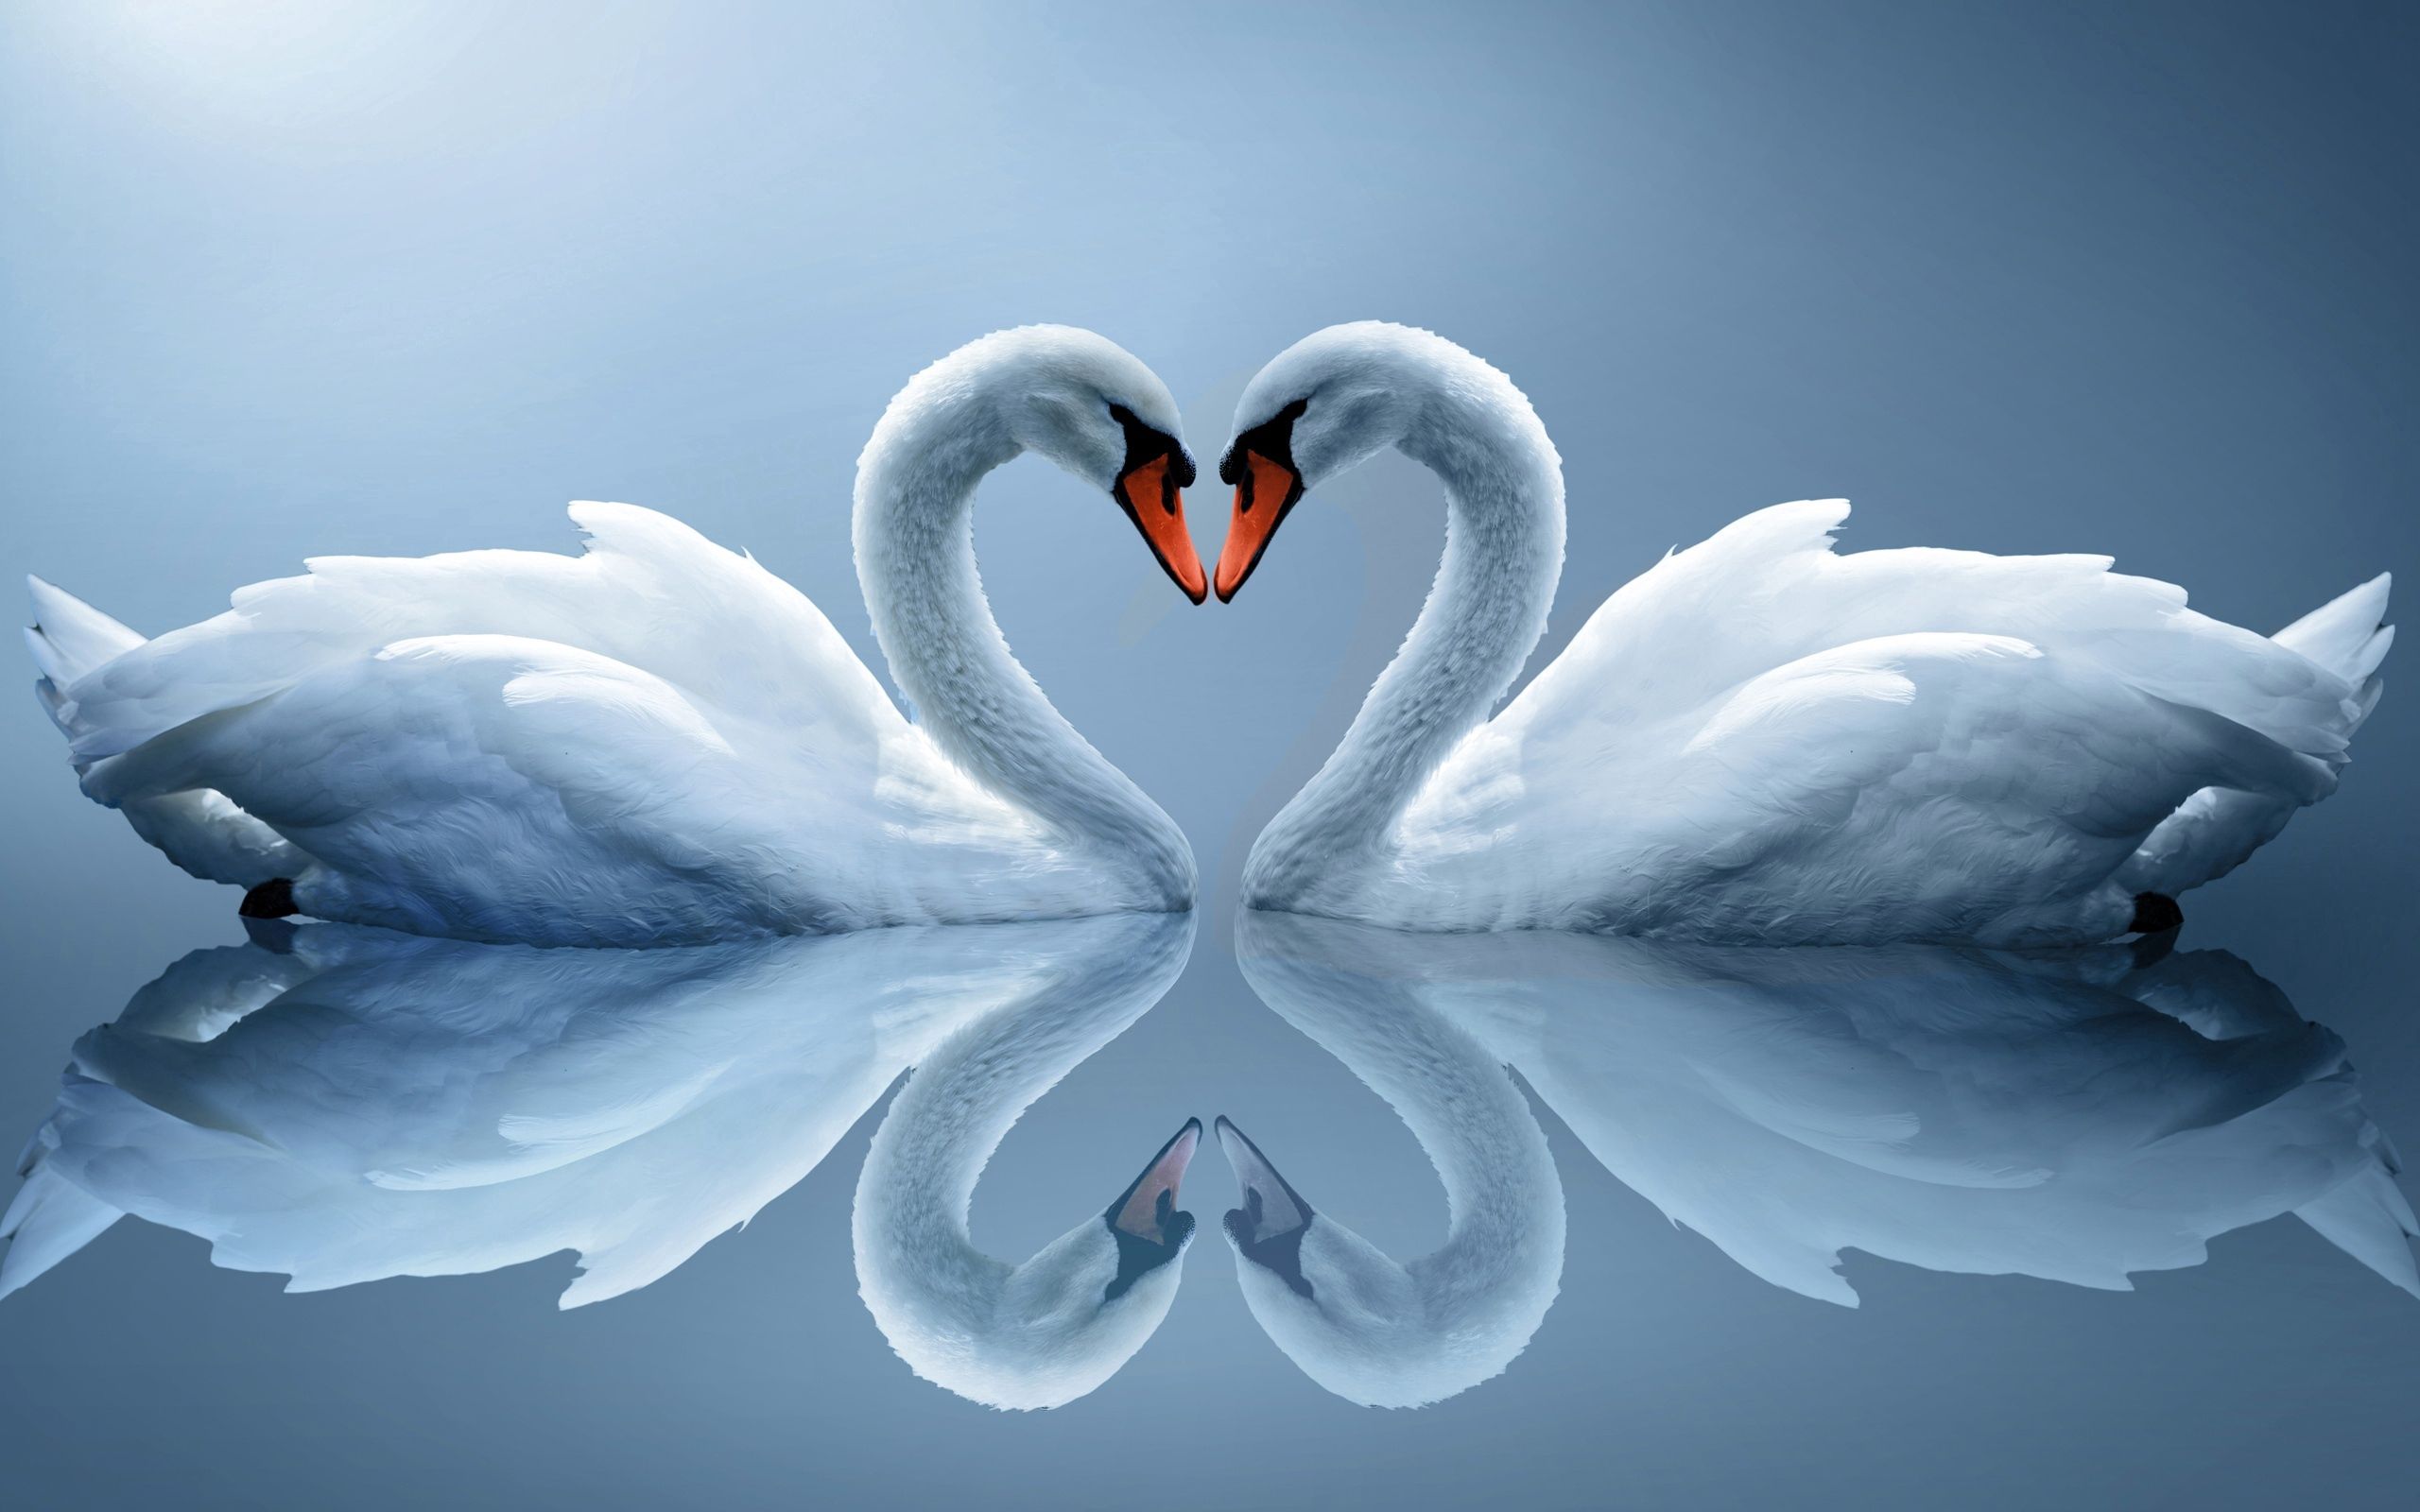 animals, heart, couple, pair, reflection, white swans wallpaper for mobile